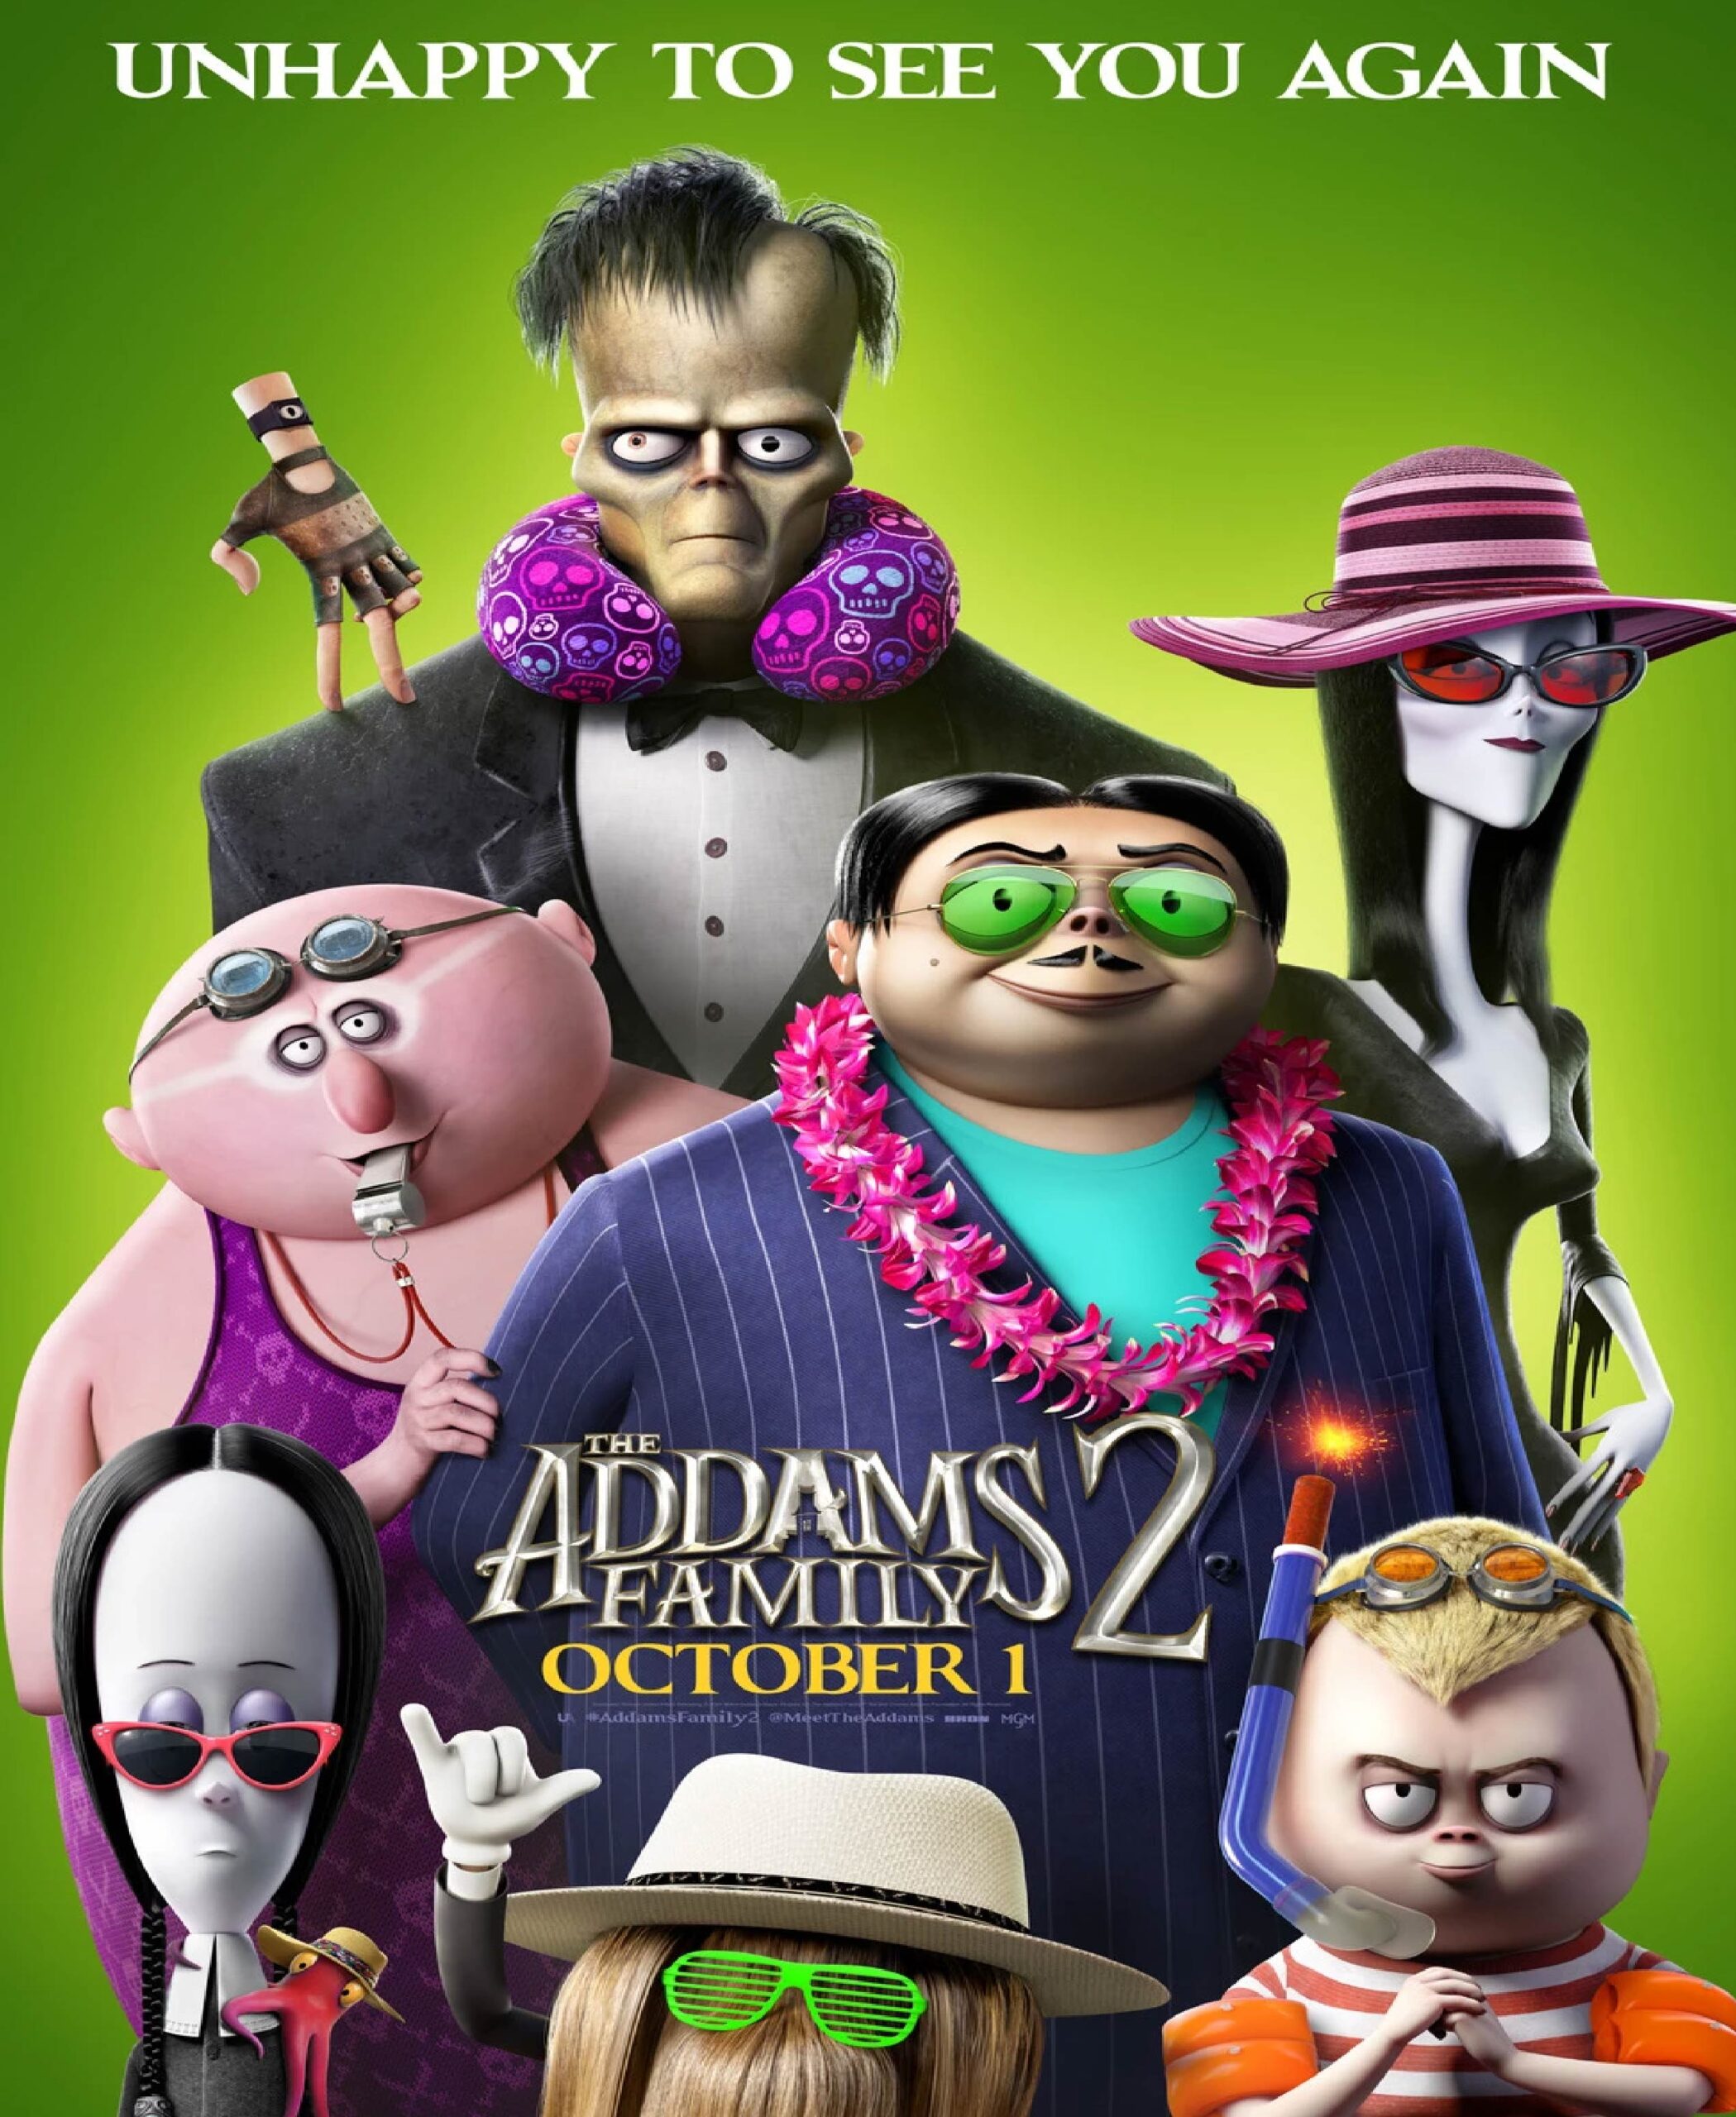 The Addams Family 2 (Songs)